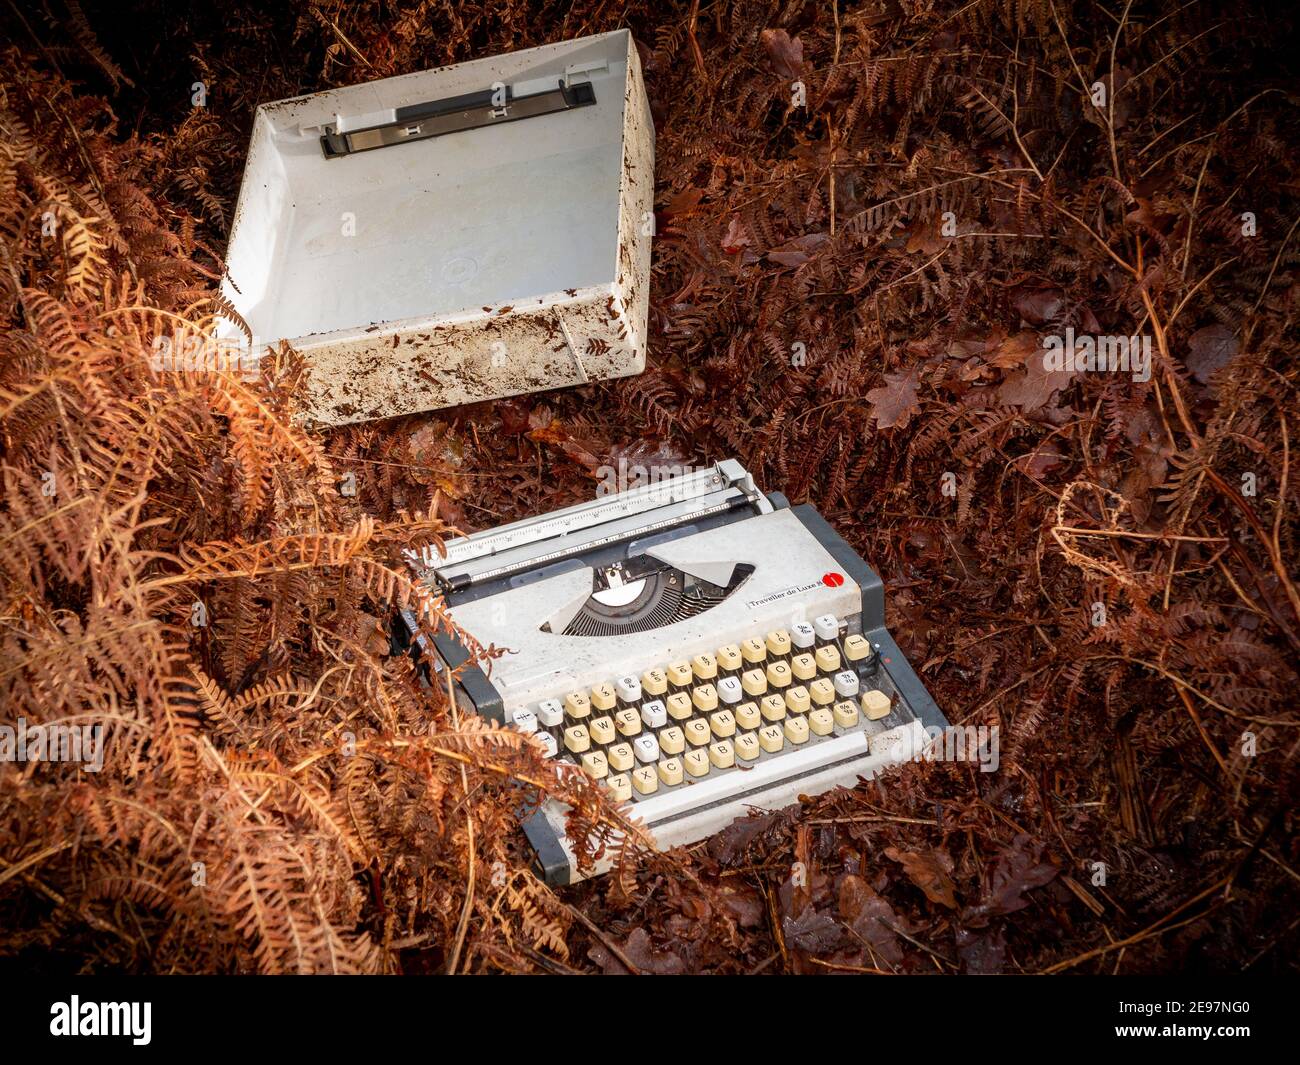 An unwanted portable typewriter dumped in a tangle of autumn bracken Stock Photo